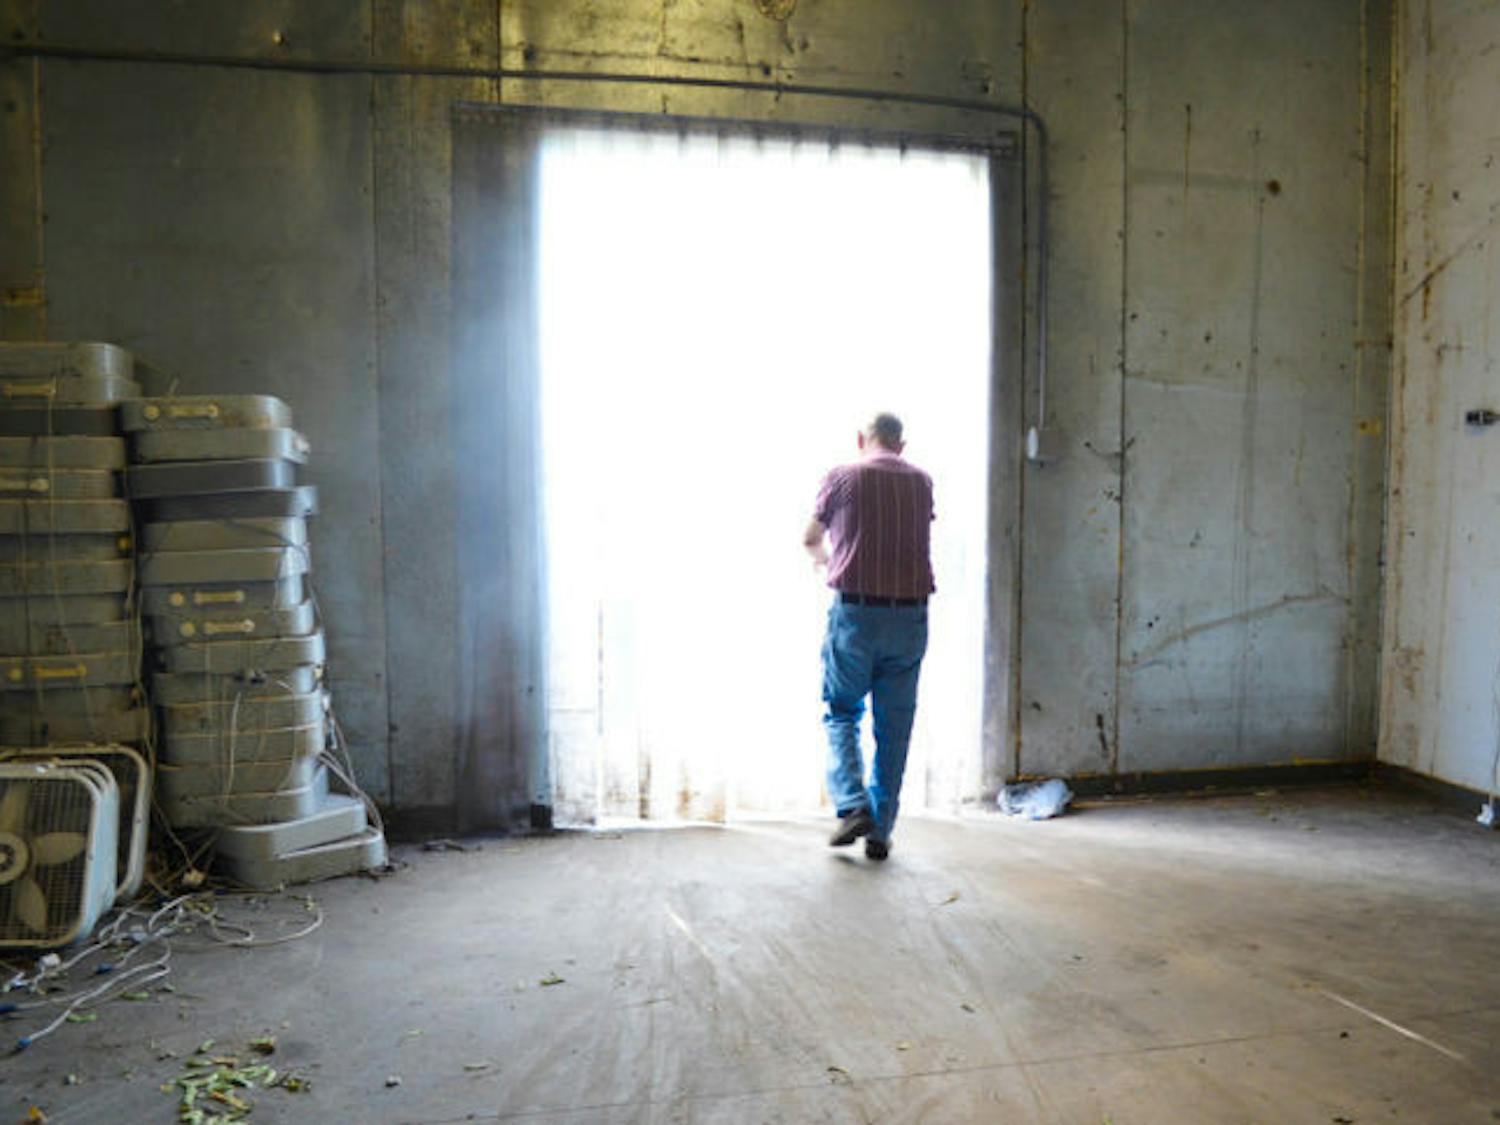 Larry Rogers, 75, exits a refrigerated storage room on his Alachua County farm Friday. Rogers locally sells beans, cucumbers, strawberries, onions, tomatoes and other produce from his farm.
&nbsp;